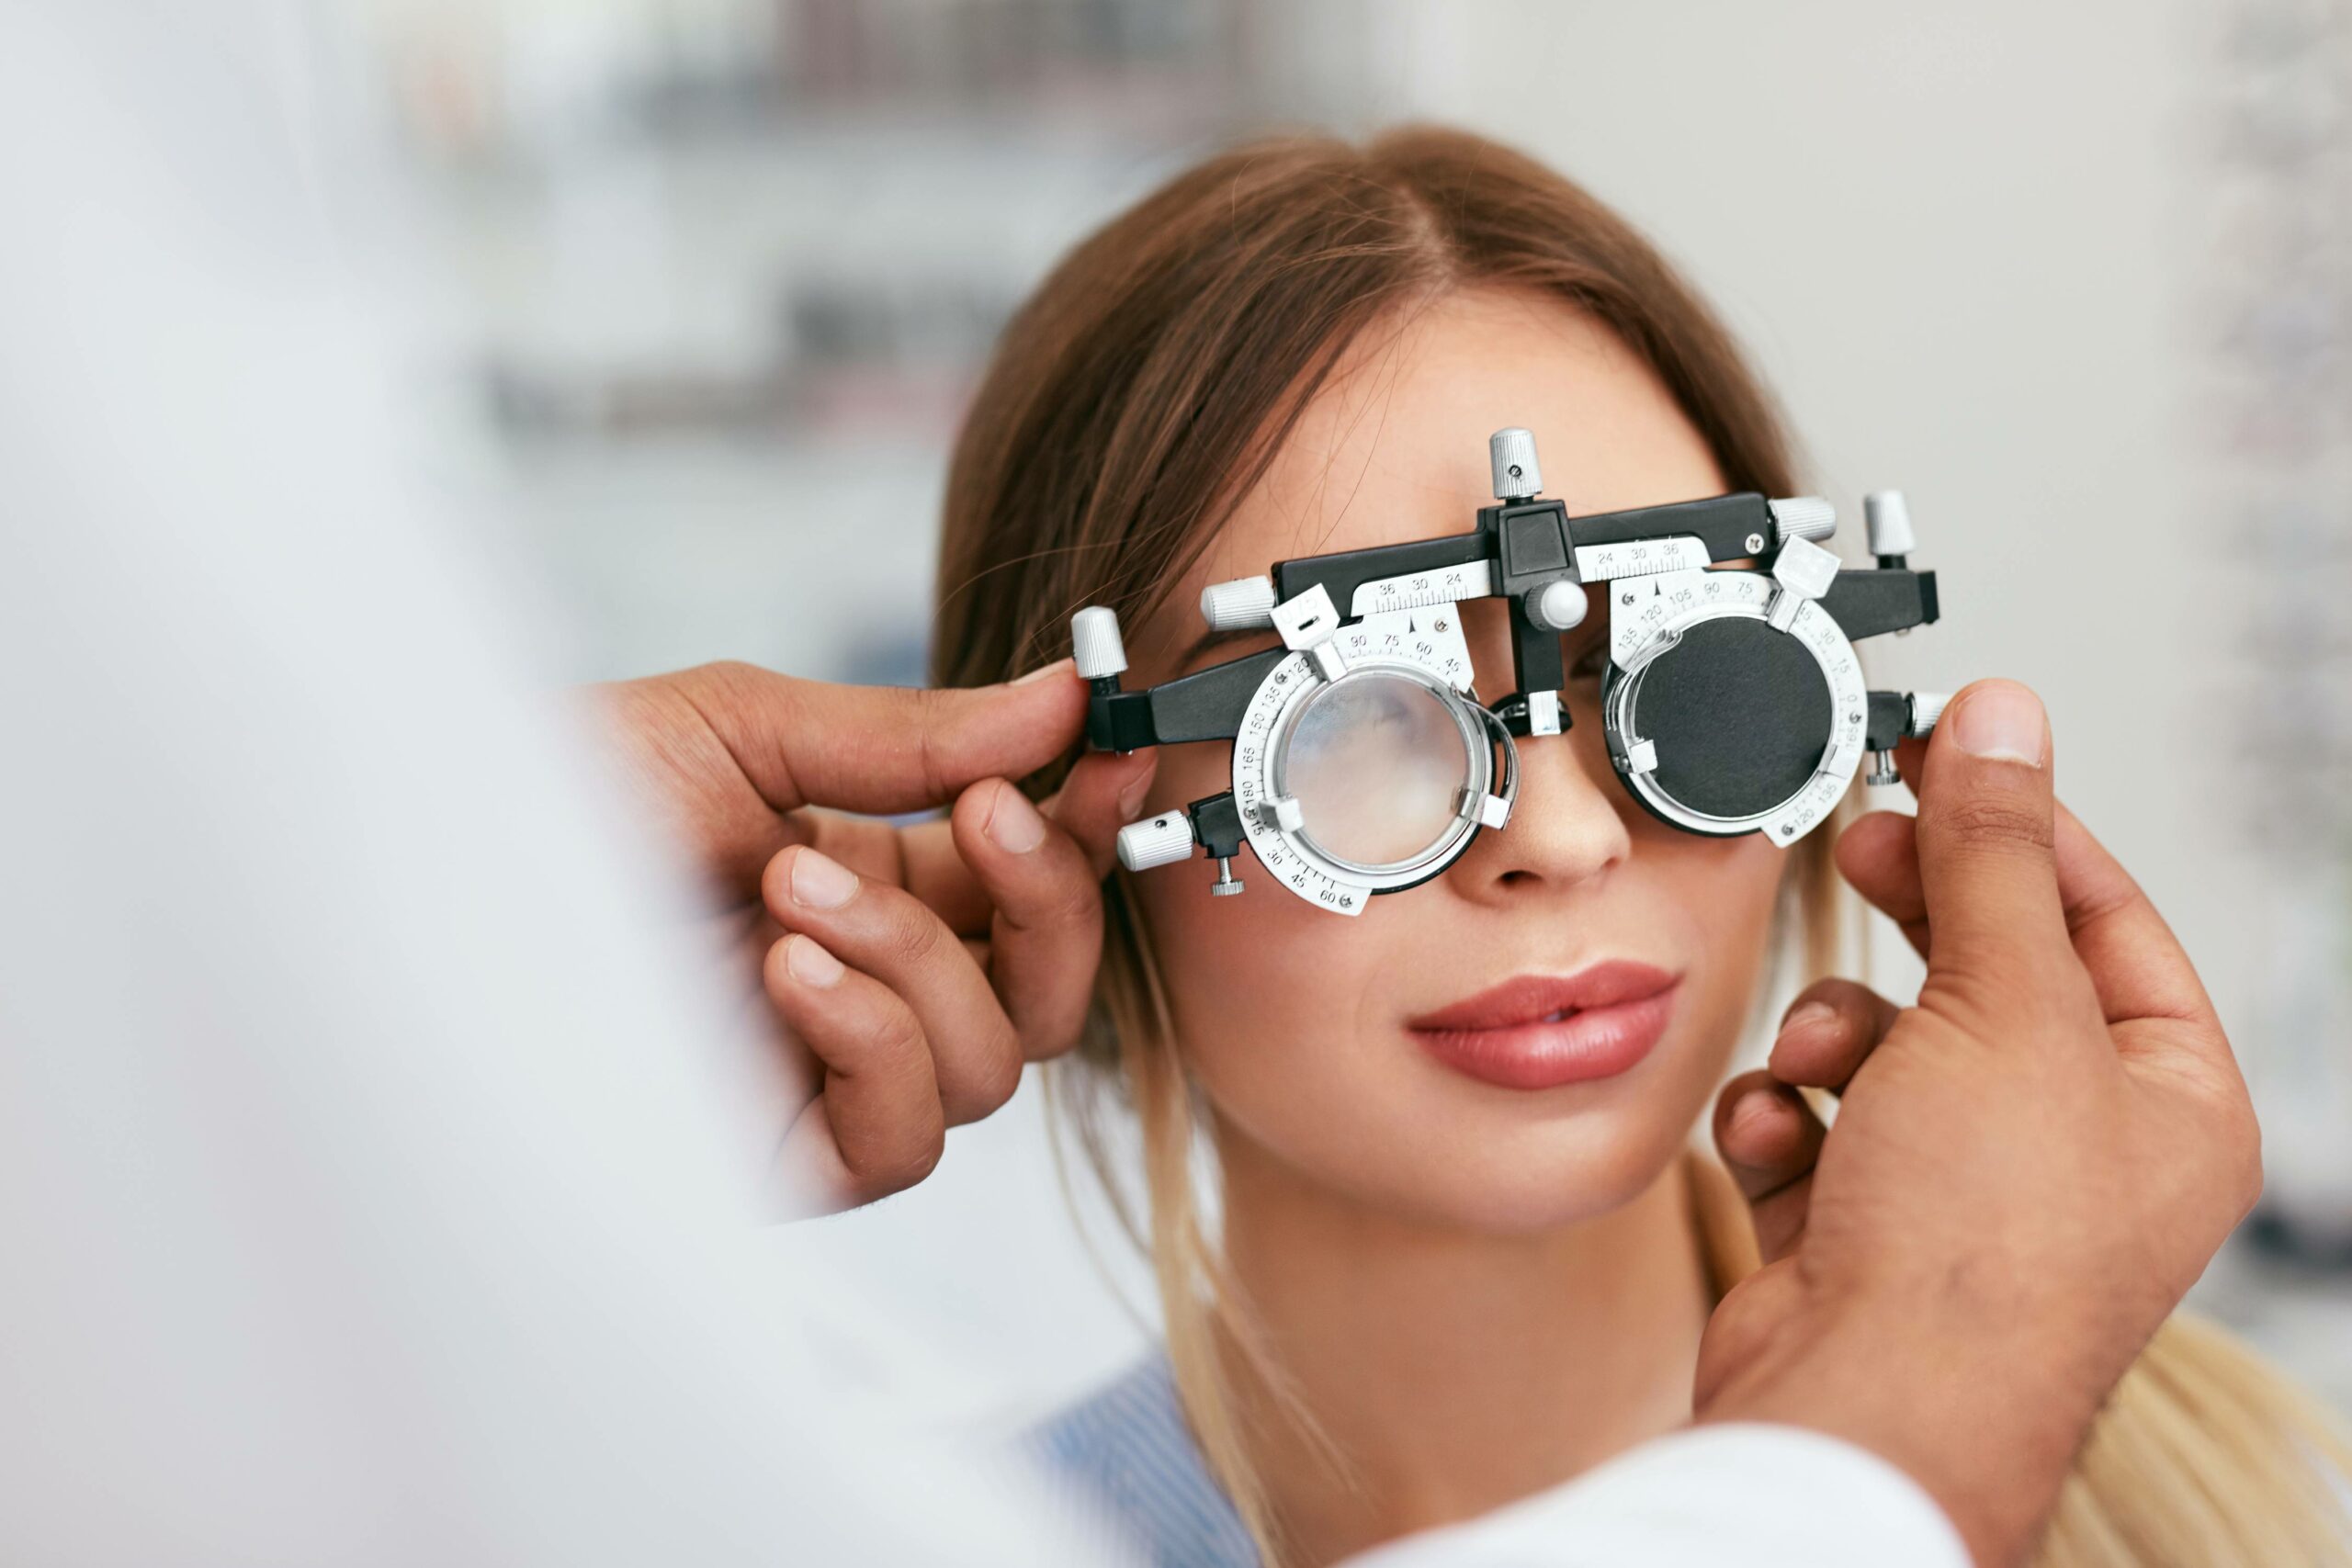 Why Are Regular Eye Checkups Crucial for Your Vision Health